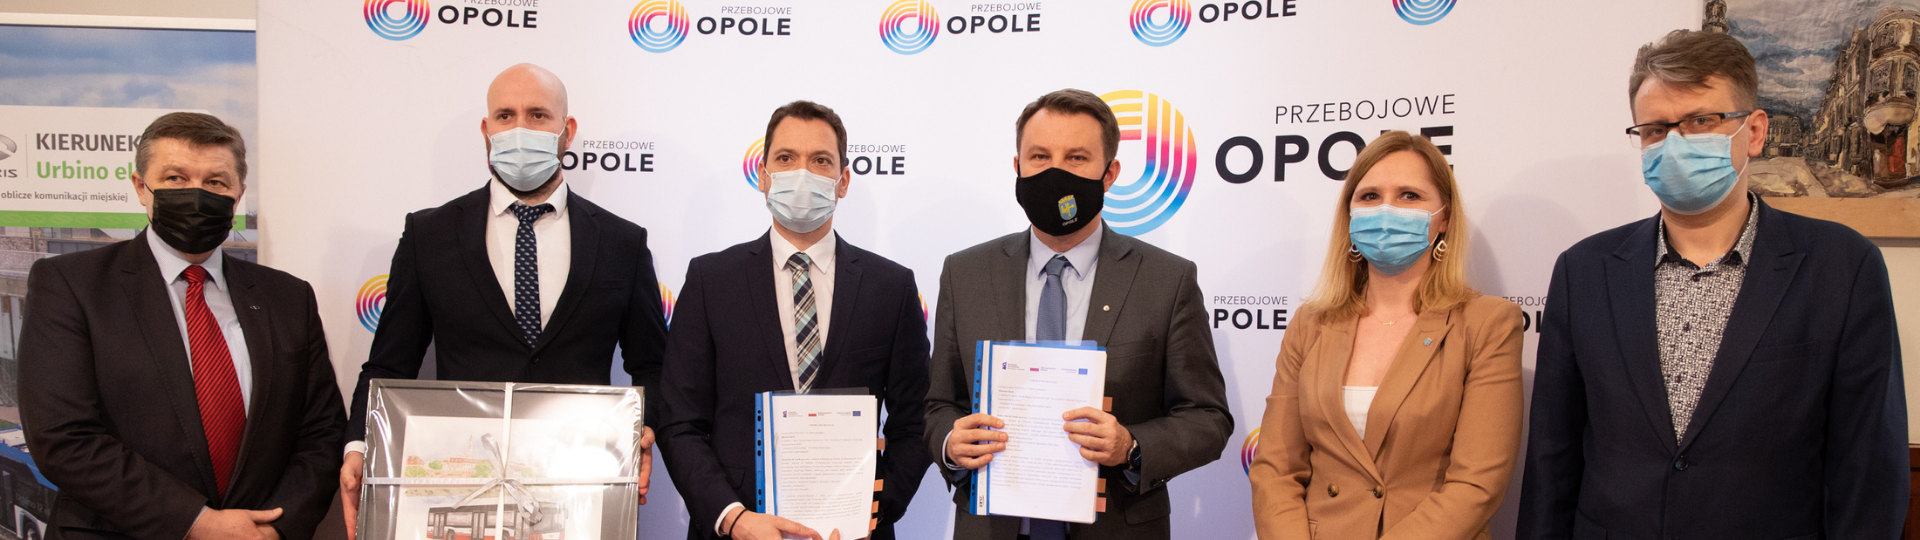 Opole invests in electric Solaris buses